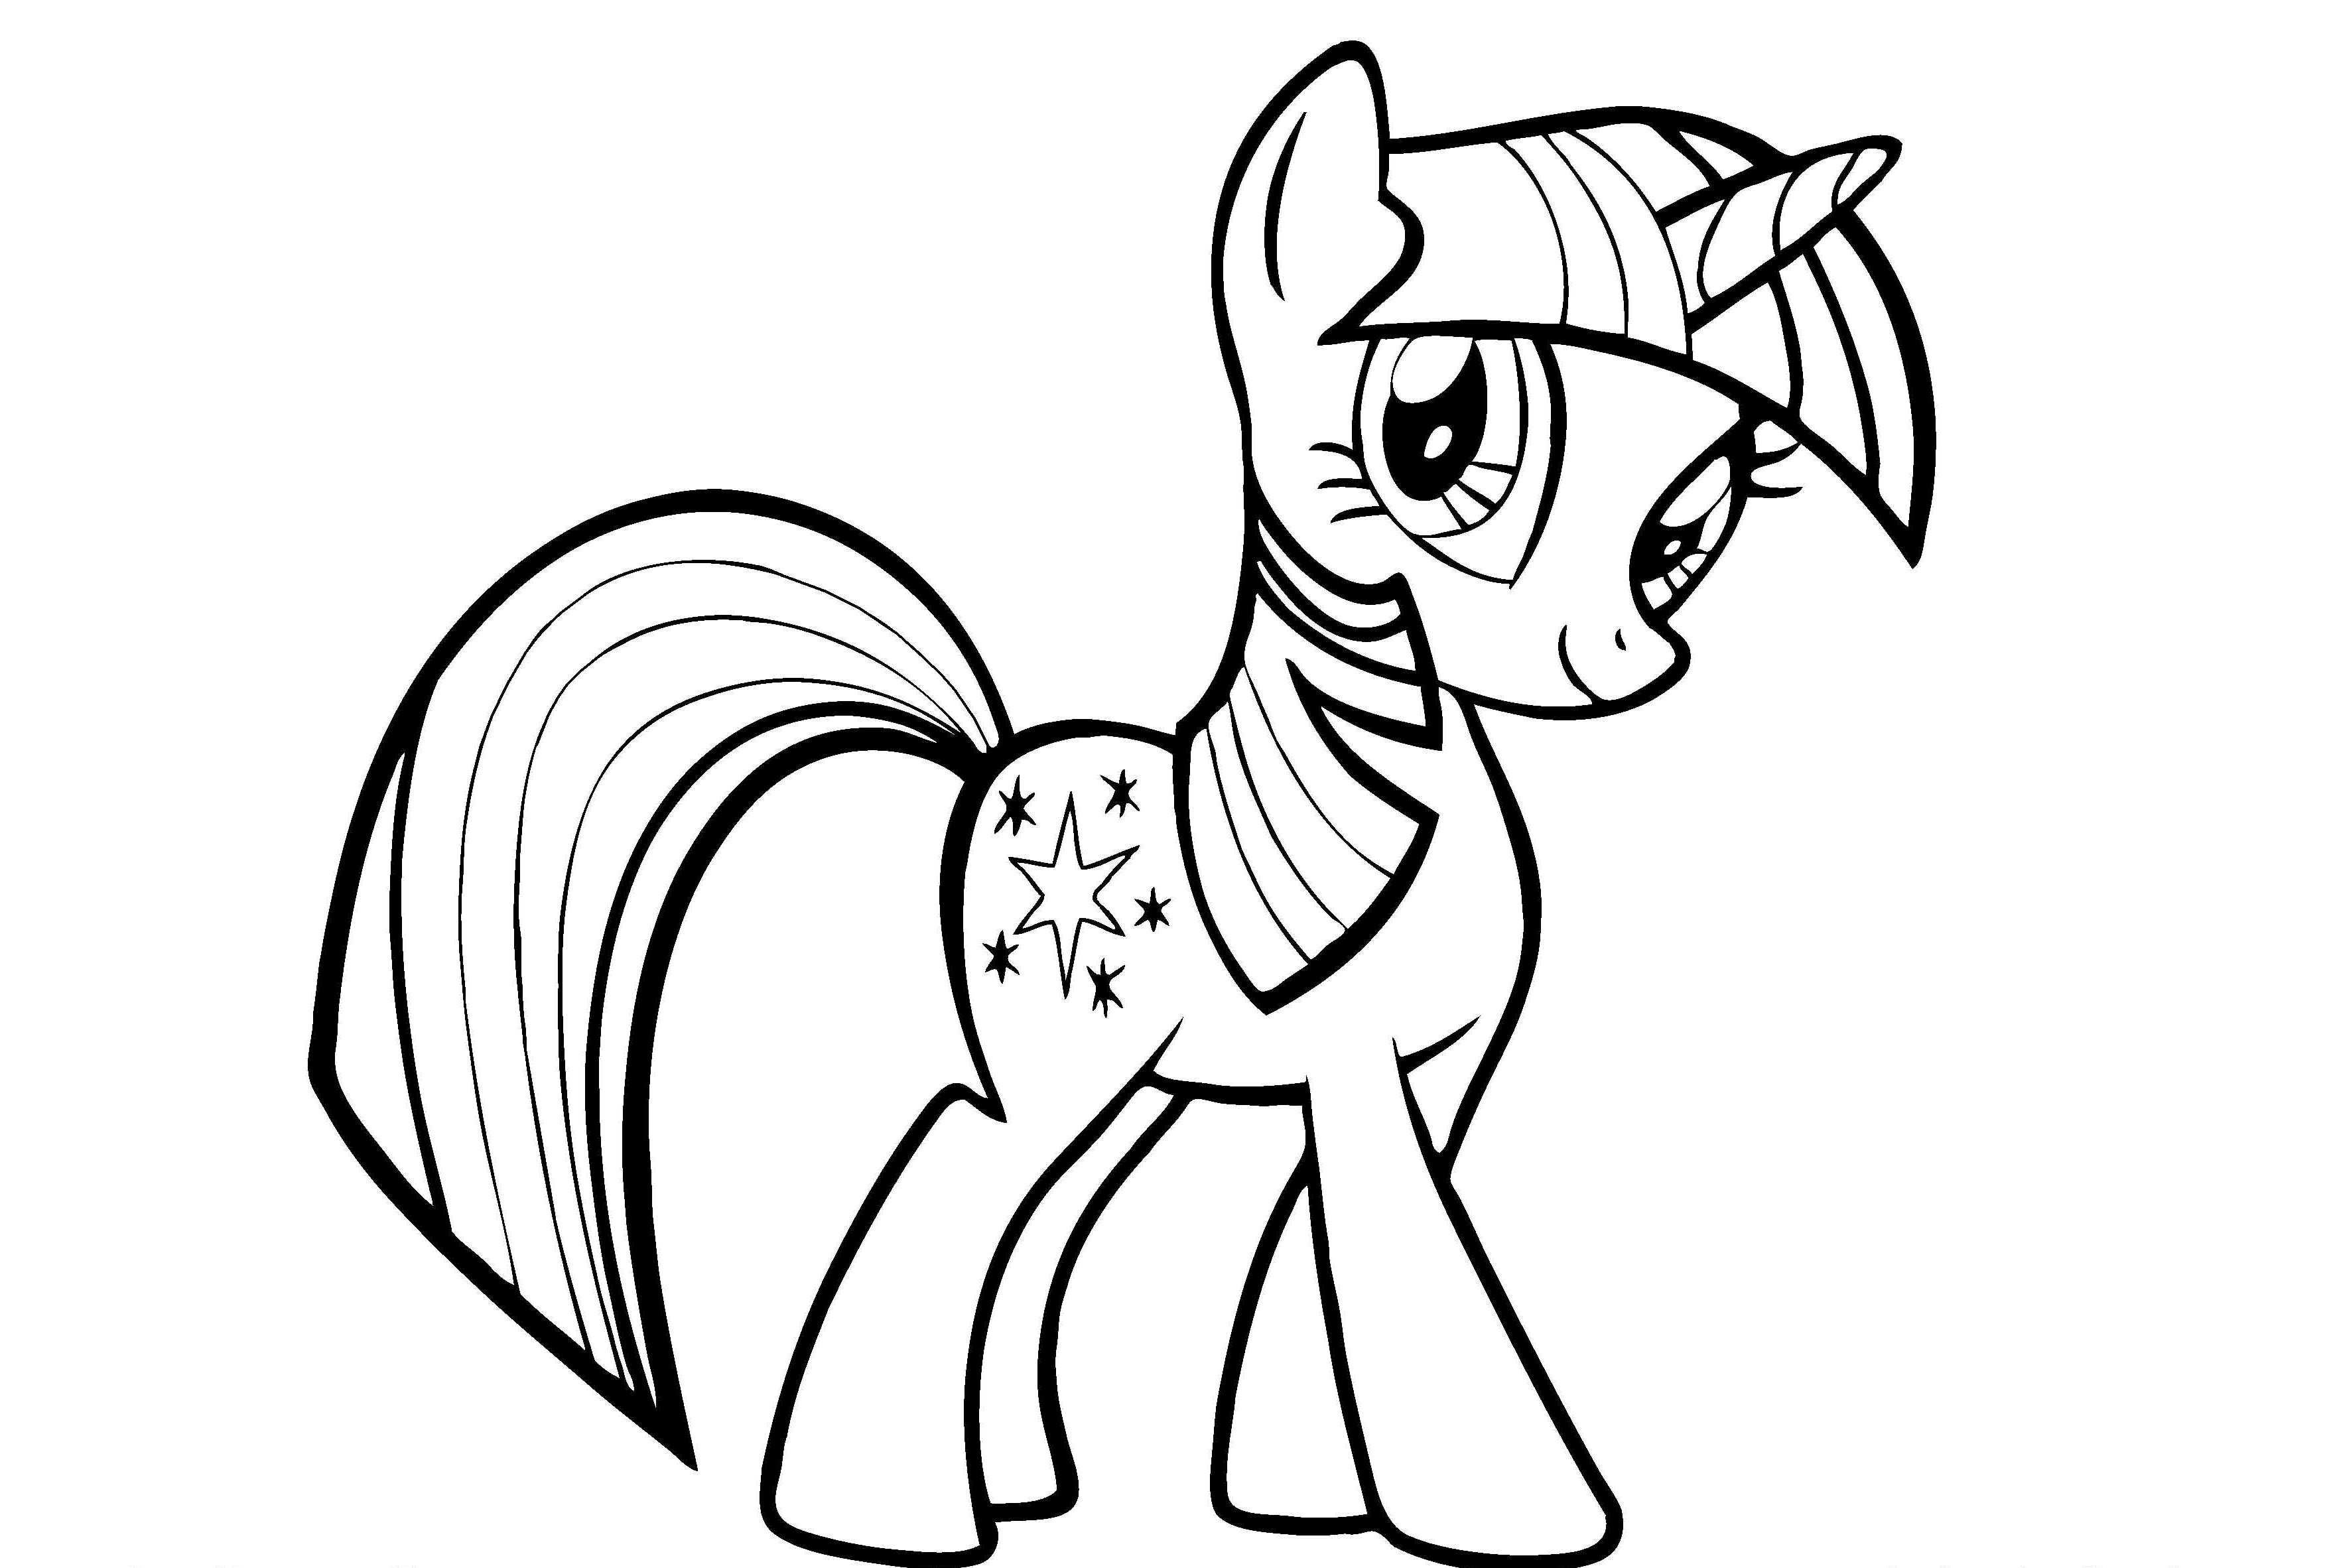 My Little Pony Twilight Sparkle Coloring Pages   My Little Pony ...